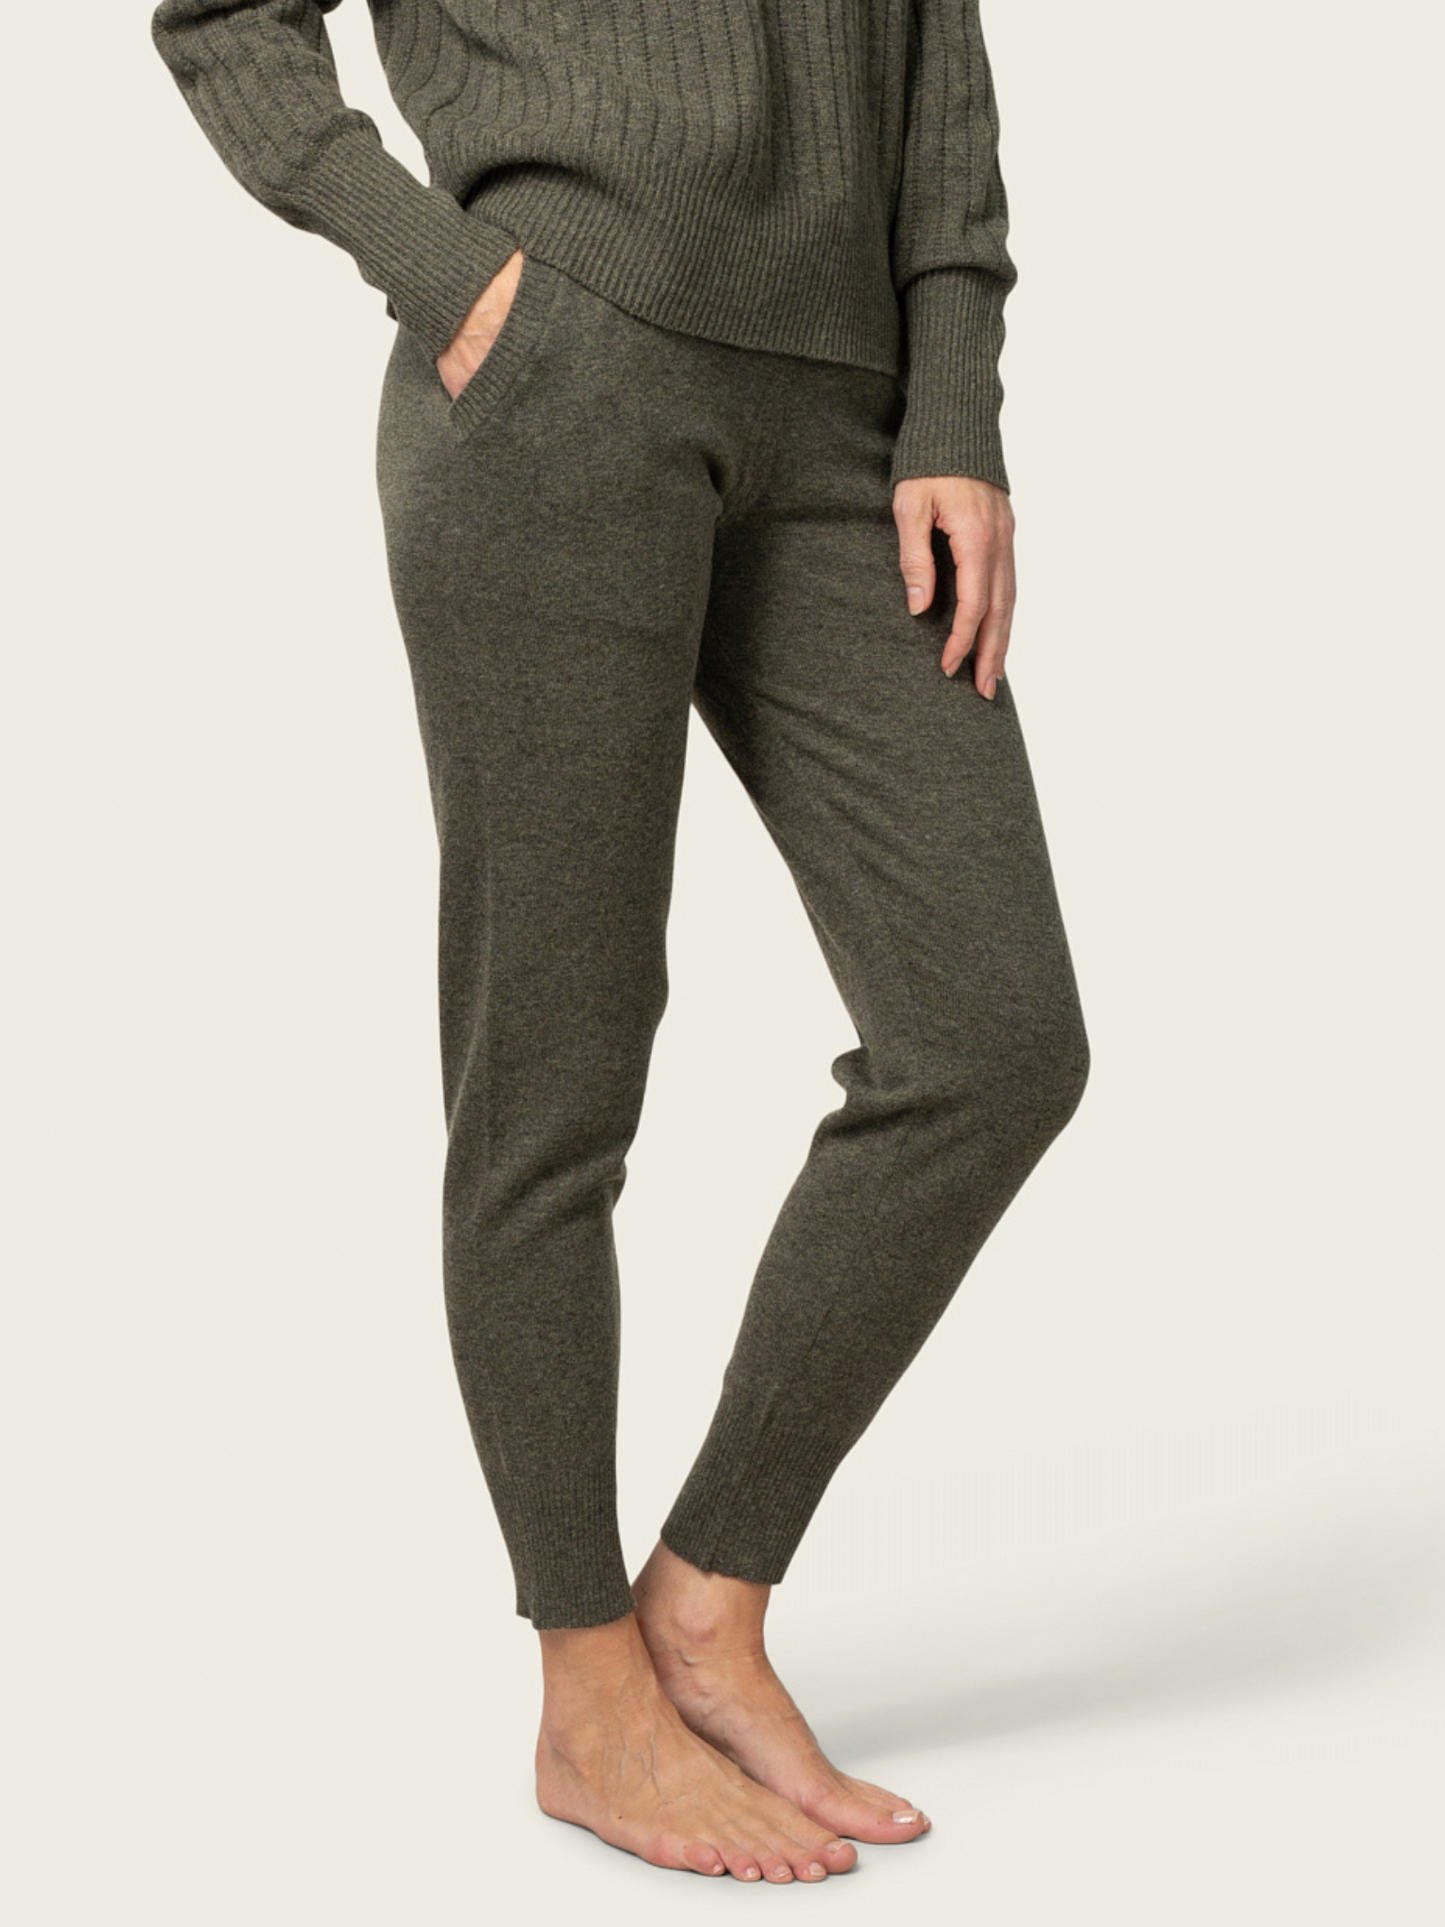 Close to my heart Luca merino cashmere pants knit pant Army